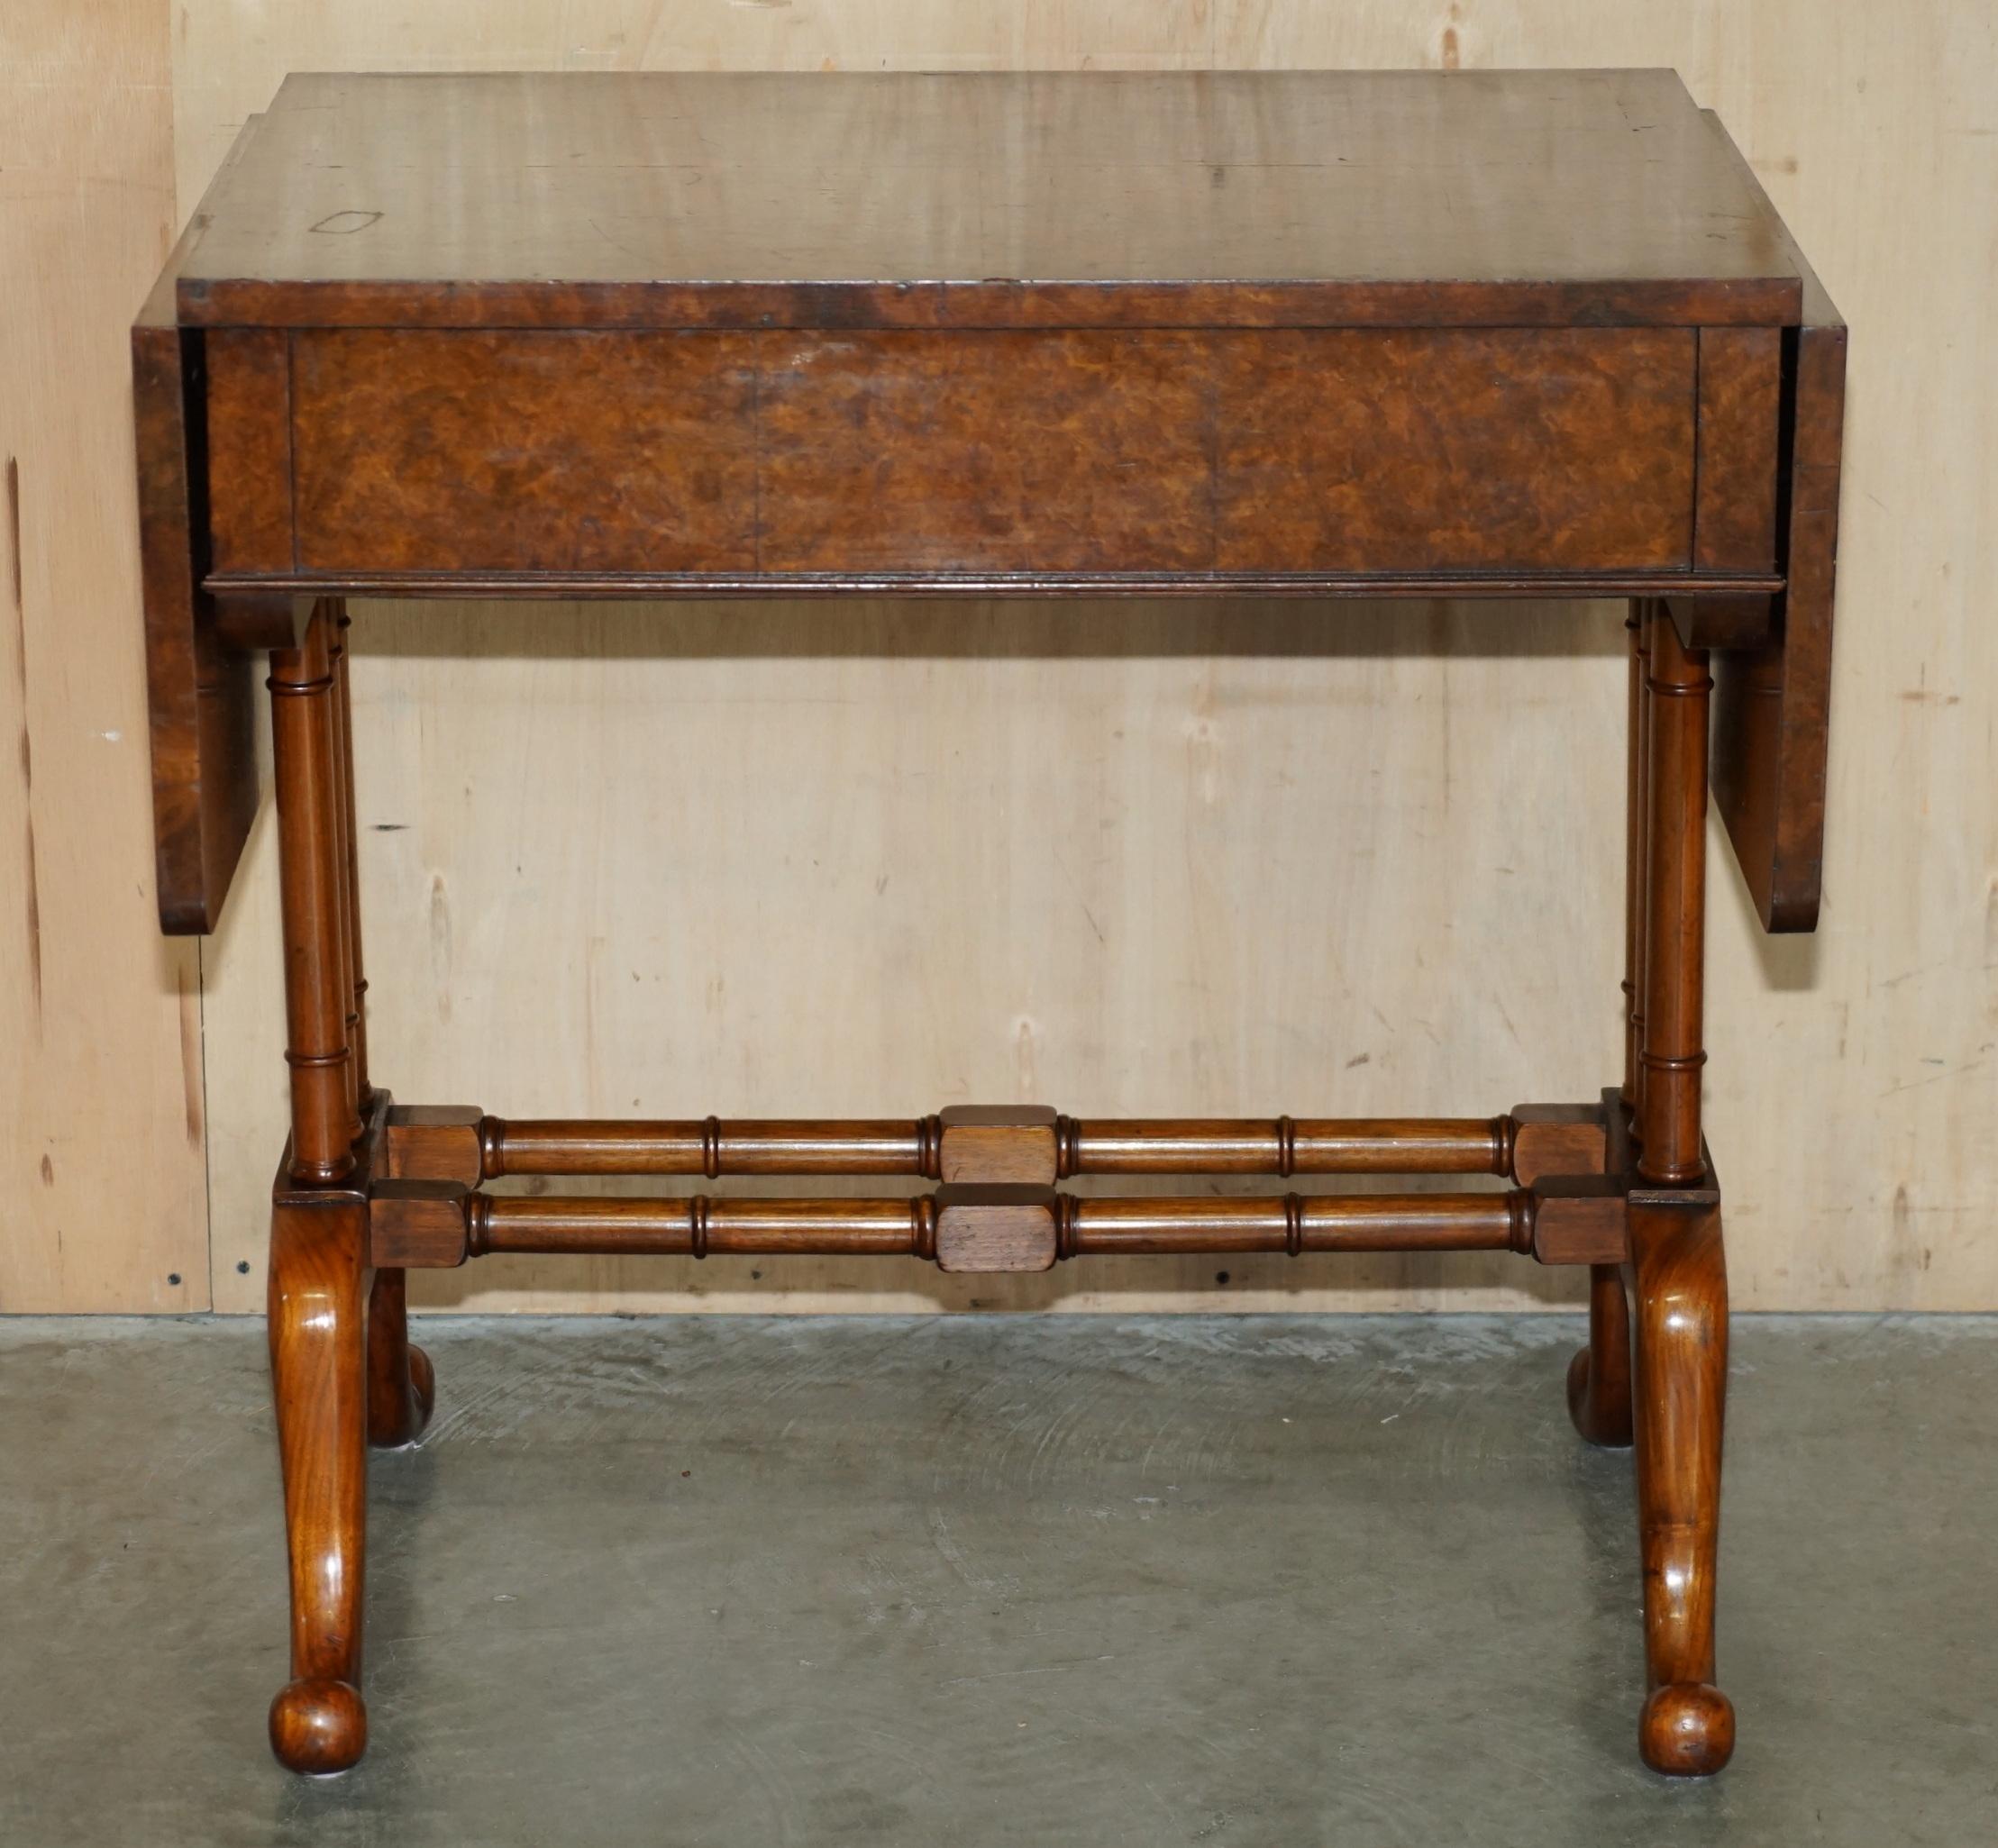 ANTIQUE CIRCA 1880 EXTRA LARGE BURR WALNUT EXTENDING SOFA TABLE STUNNING PATiNA For Sale 3